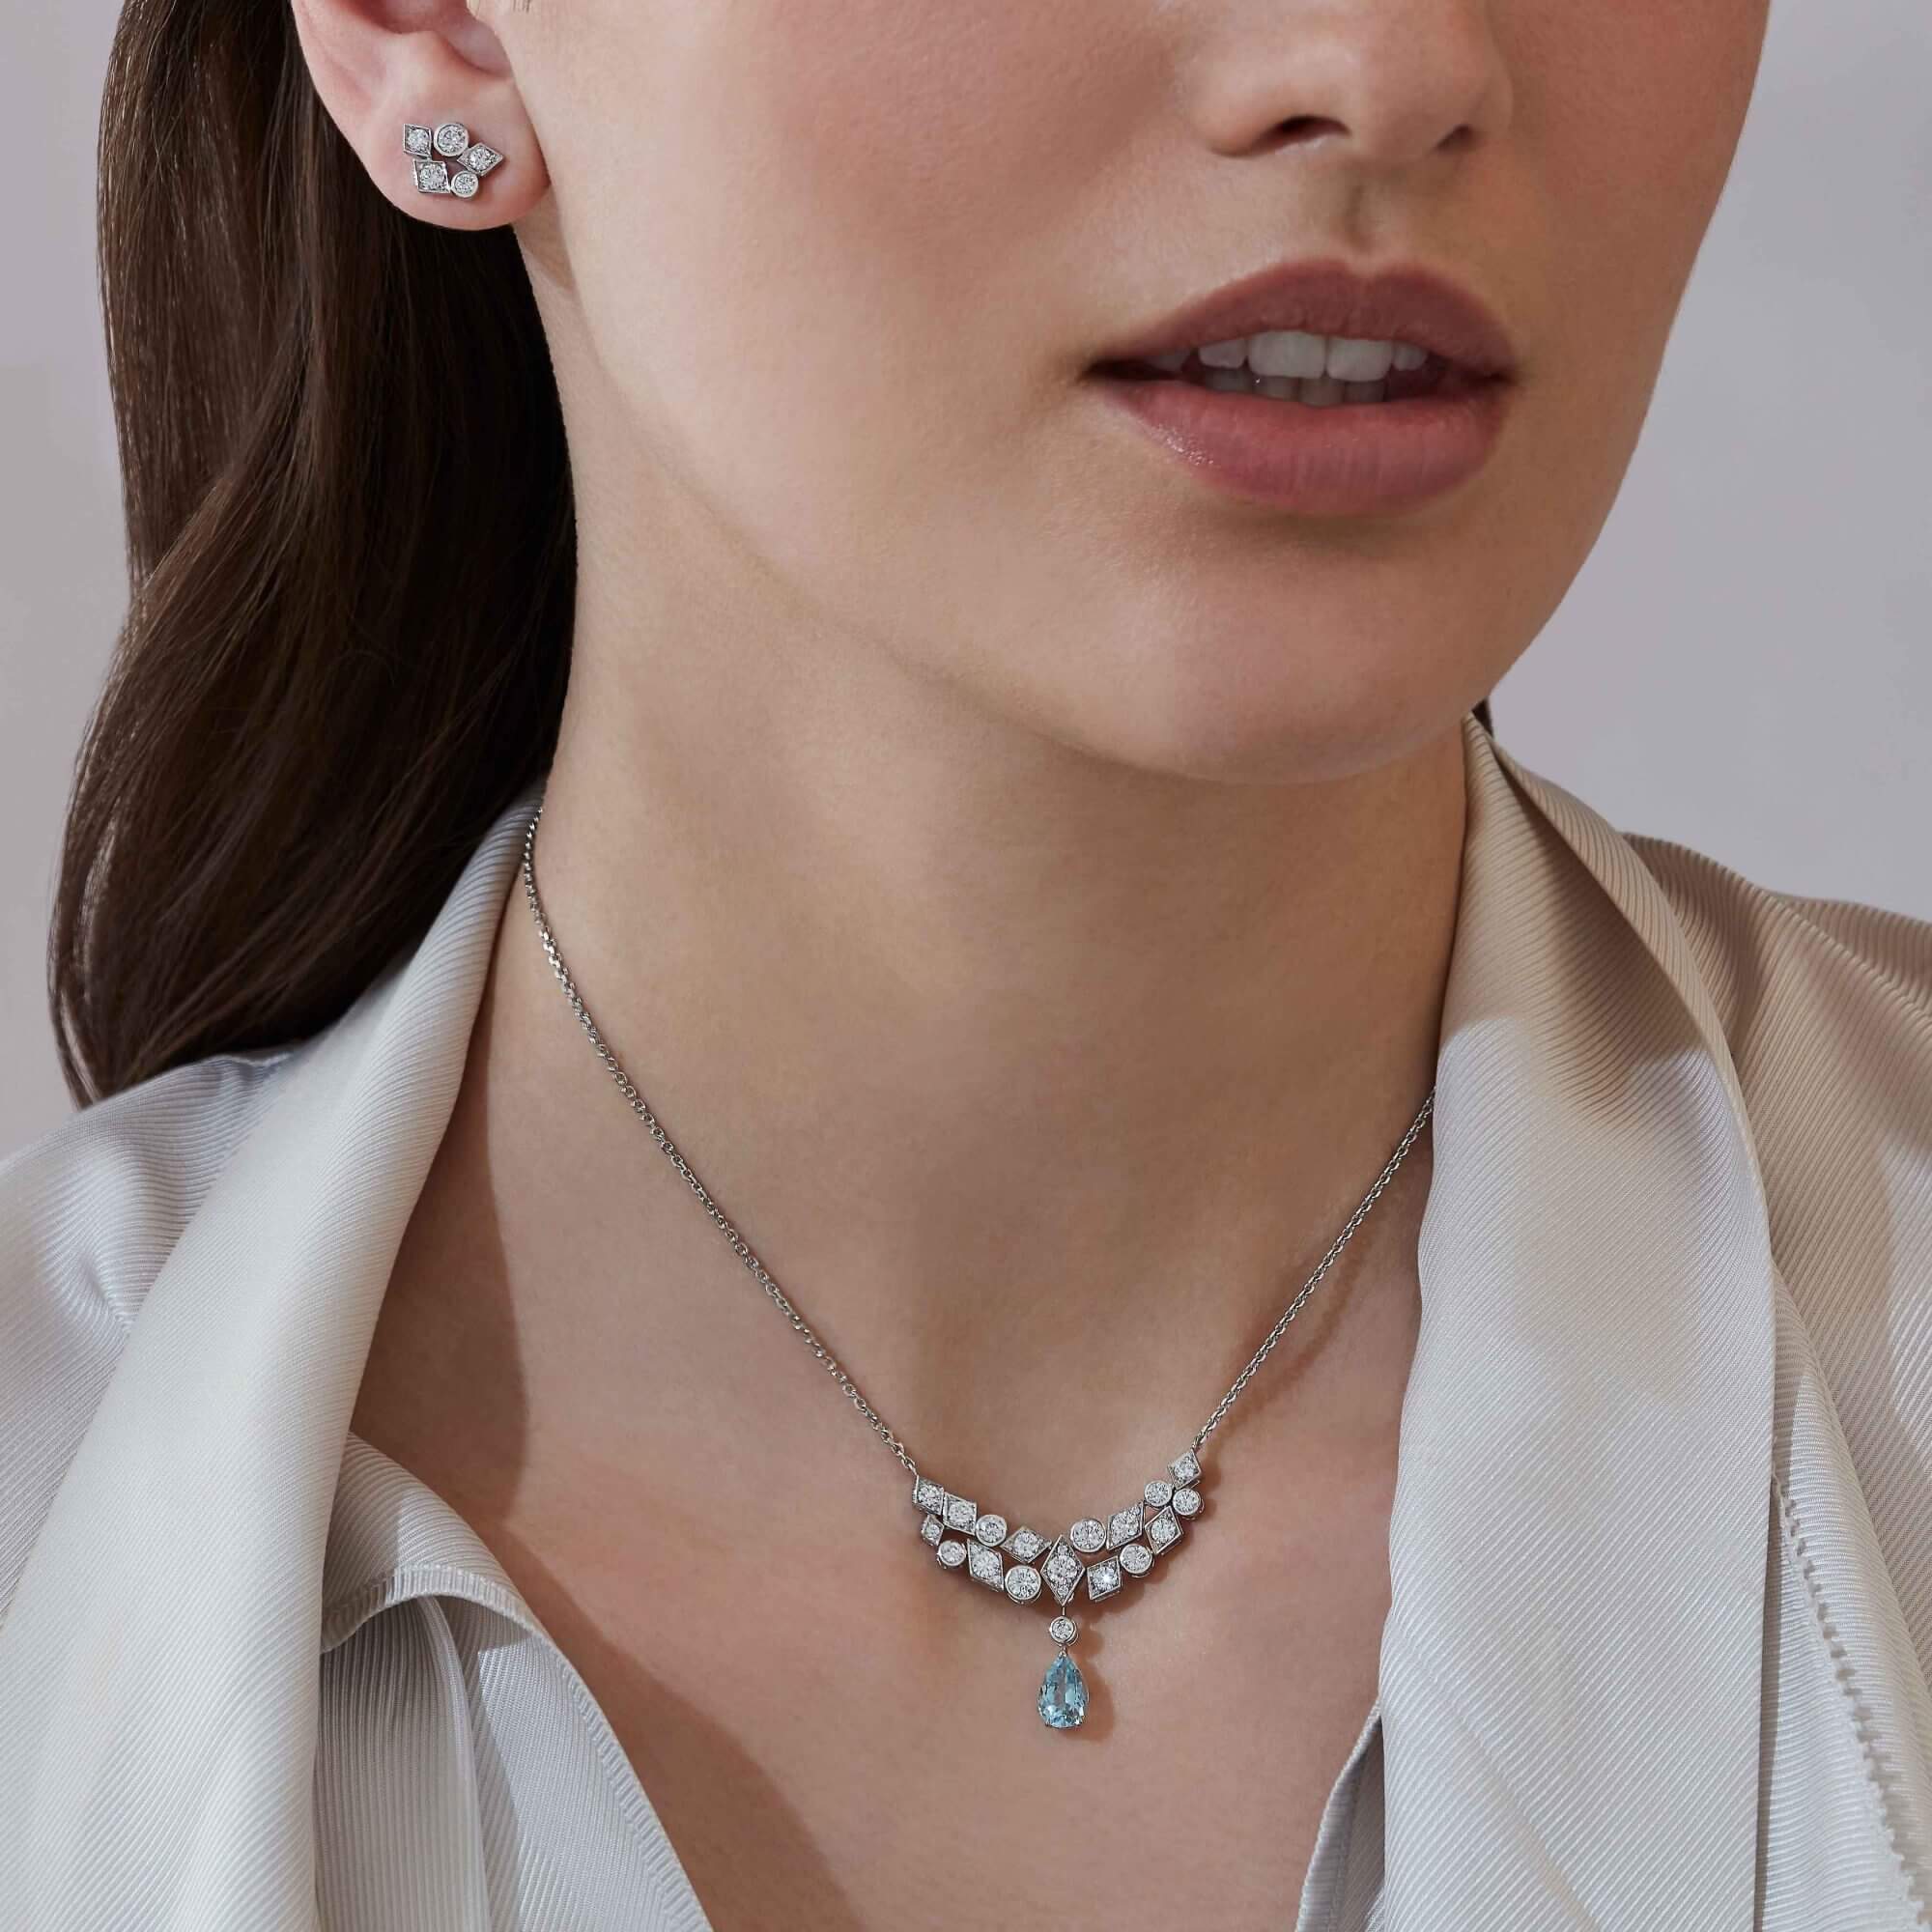 Garrard Albemarle Abstract jewellery Collection transformable diamond necklace in 18ct white gold 2017419 and earrings on Model